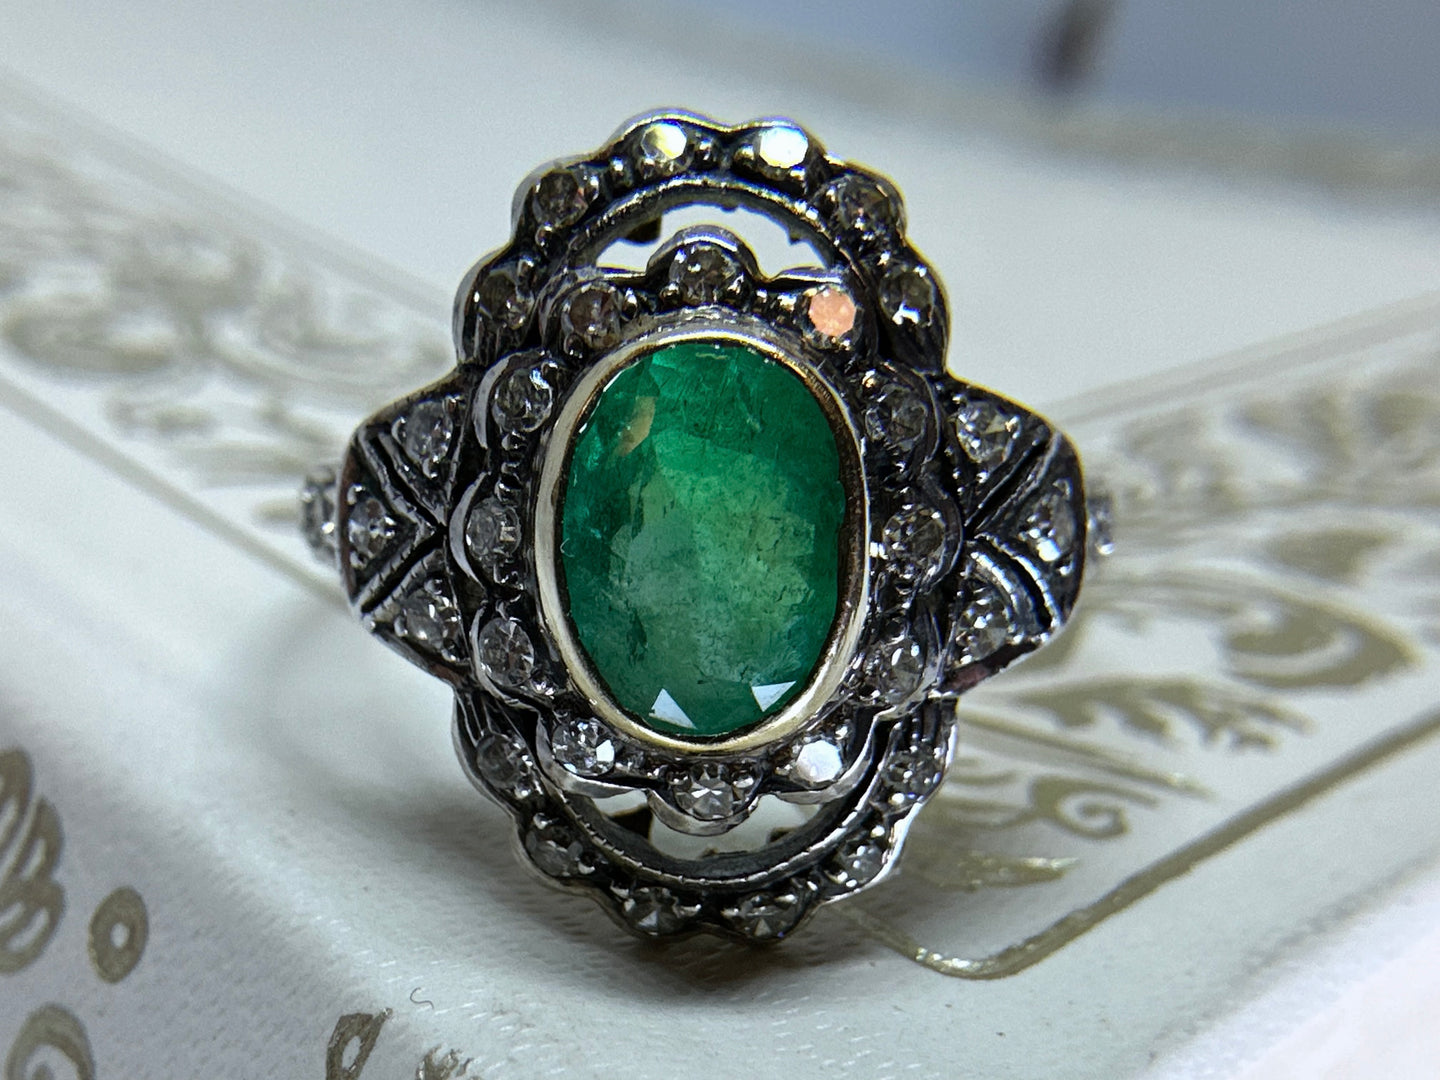 ANTIQUE STYLE EMERALD AND DIAMOND RING